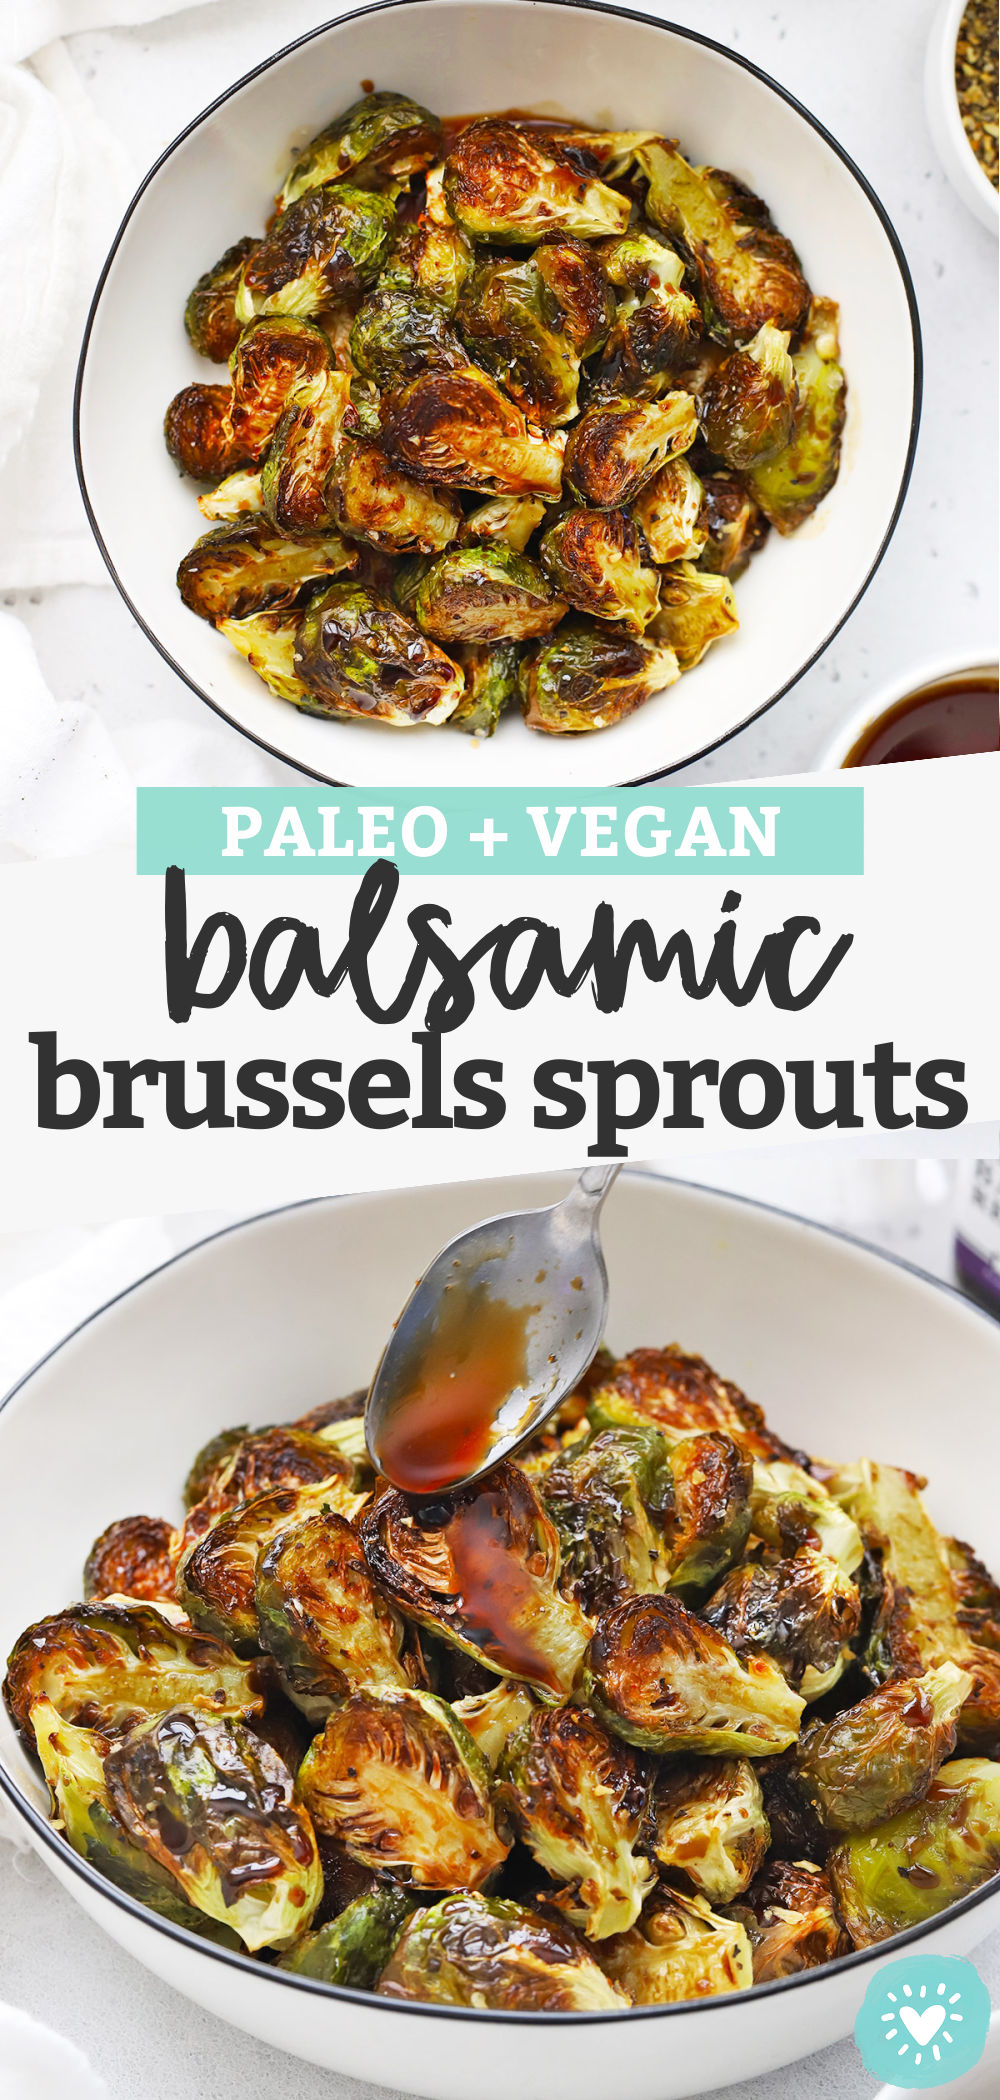 Balsamic Brussels Sprouts - Crispy roasted balsamic Brussels Sprouts with balsamic glaze make a delicious side dish you'll come back to again and again. (Paleo, Vegan) // Maple Balsamic Brussels Sprouts // Roasted Brussels Sprouts recipe // Thanksgiving side dish #paleo #vegan #brusselssprouts #sidedish #thanksgiving